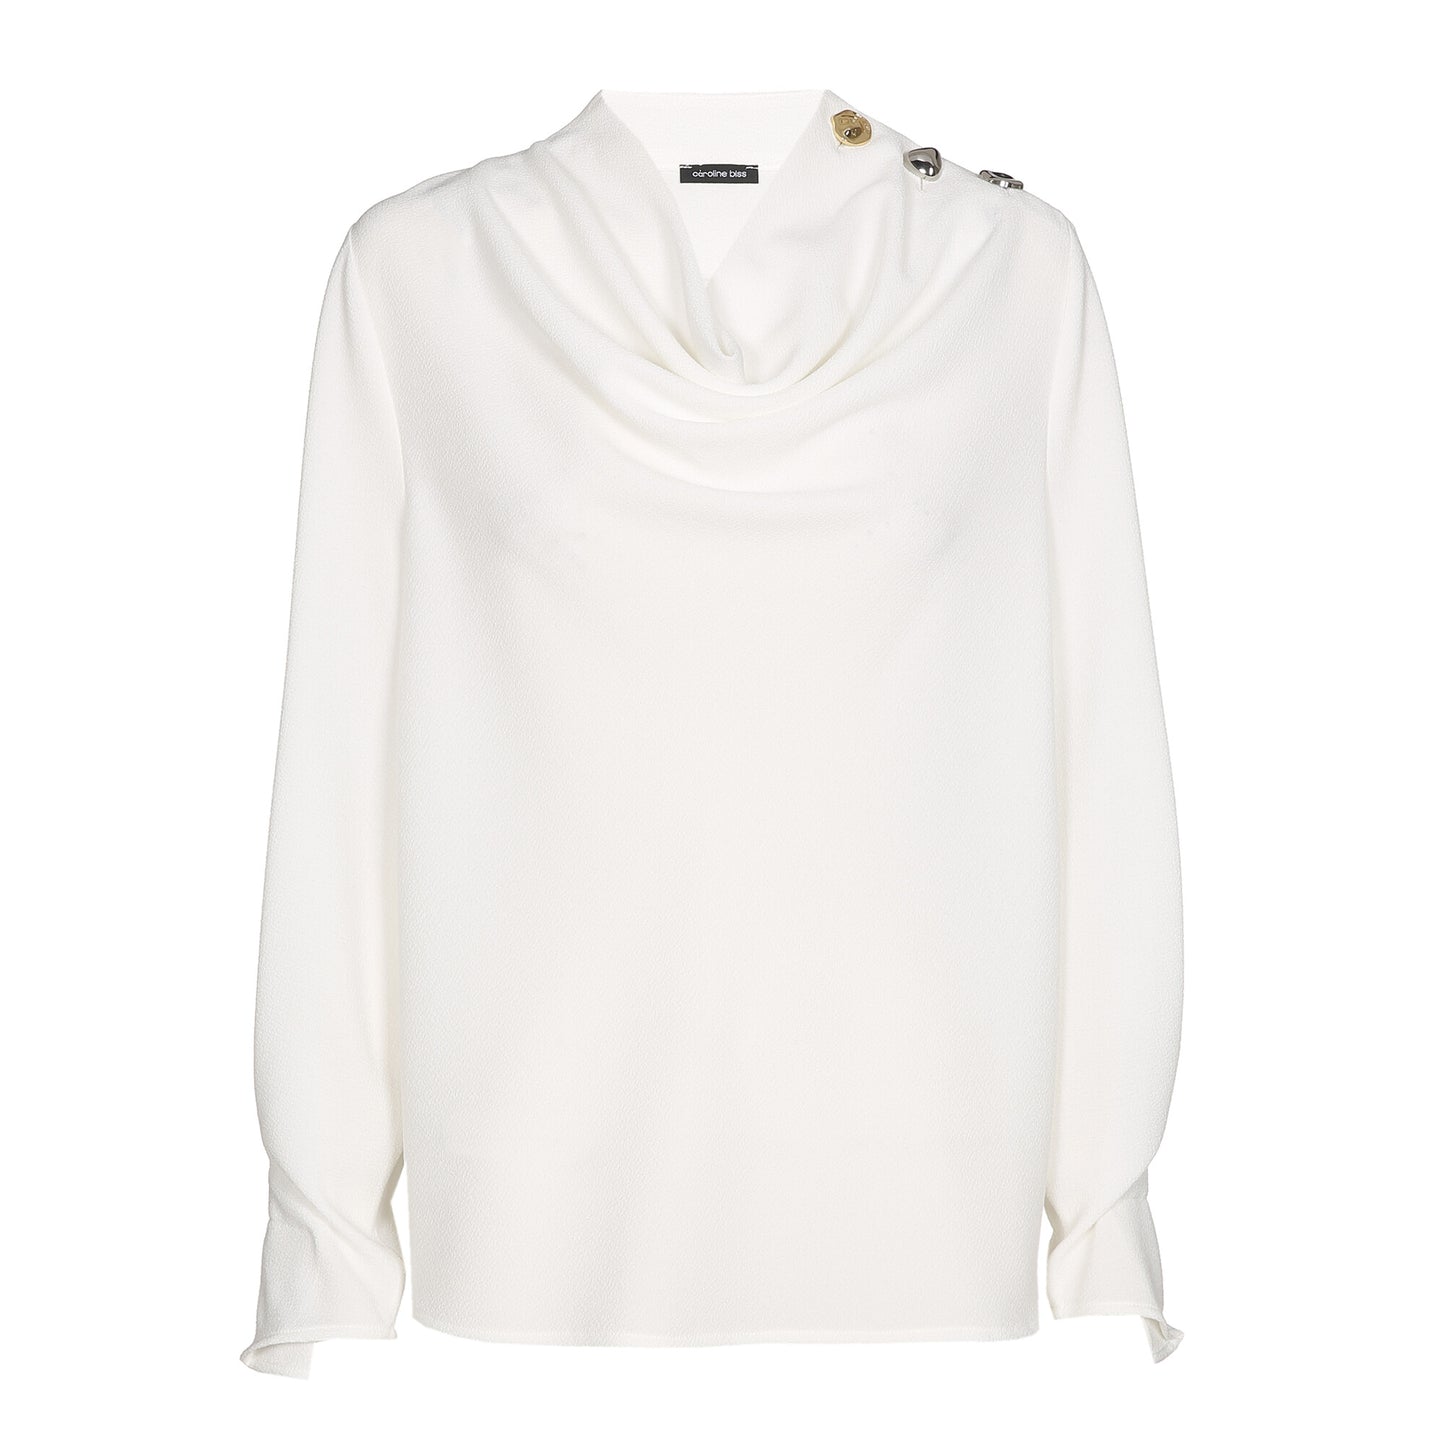 Cowl Neck Crepe Blouse with Metallic Details